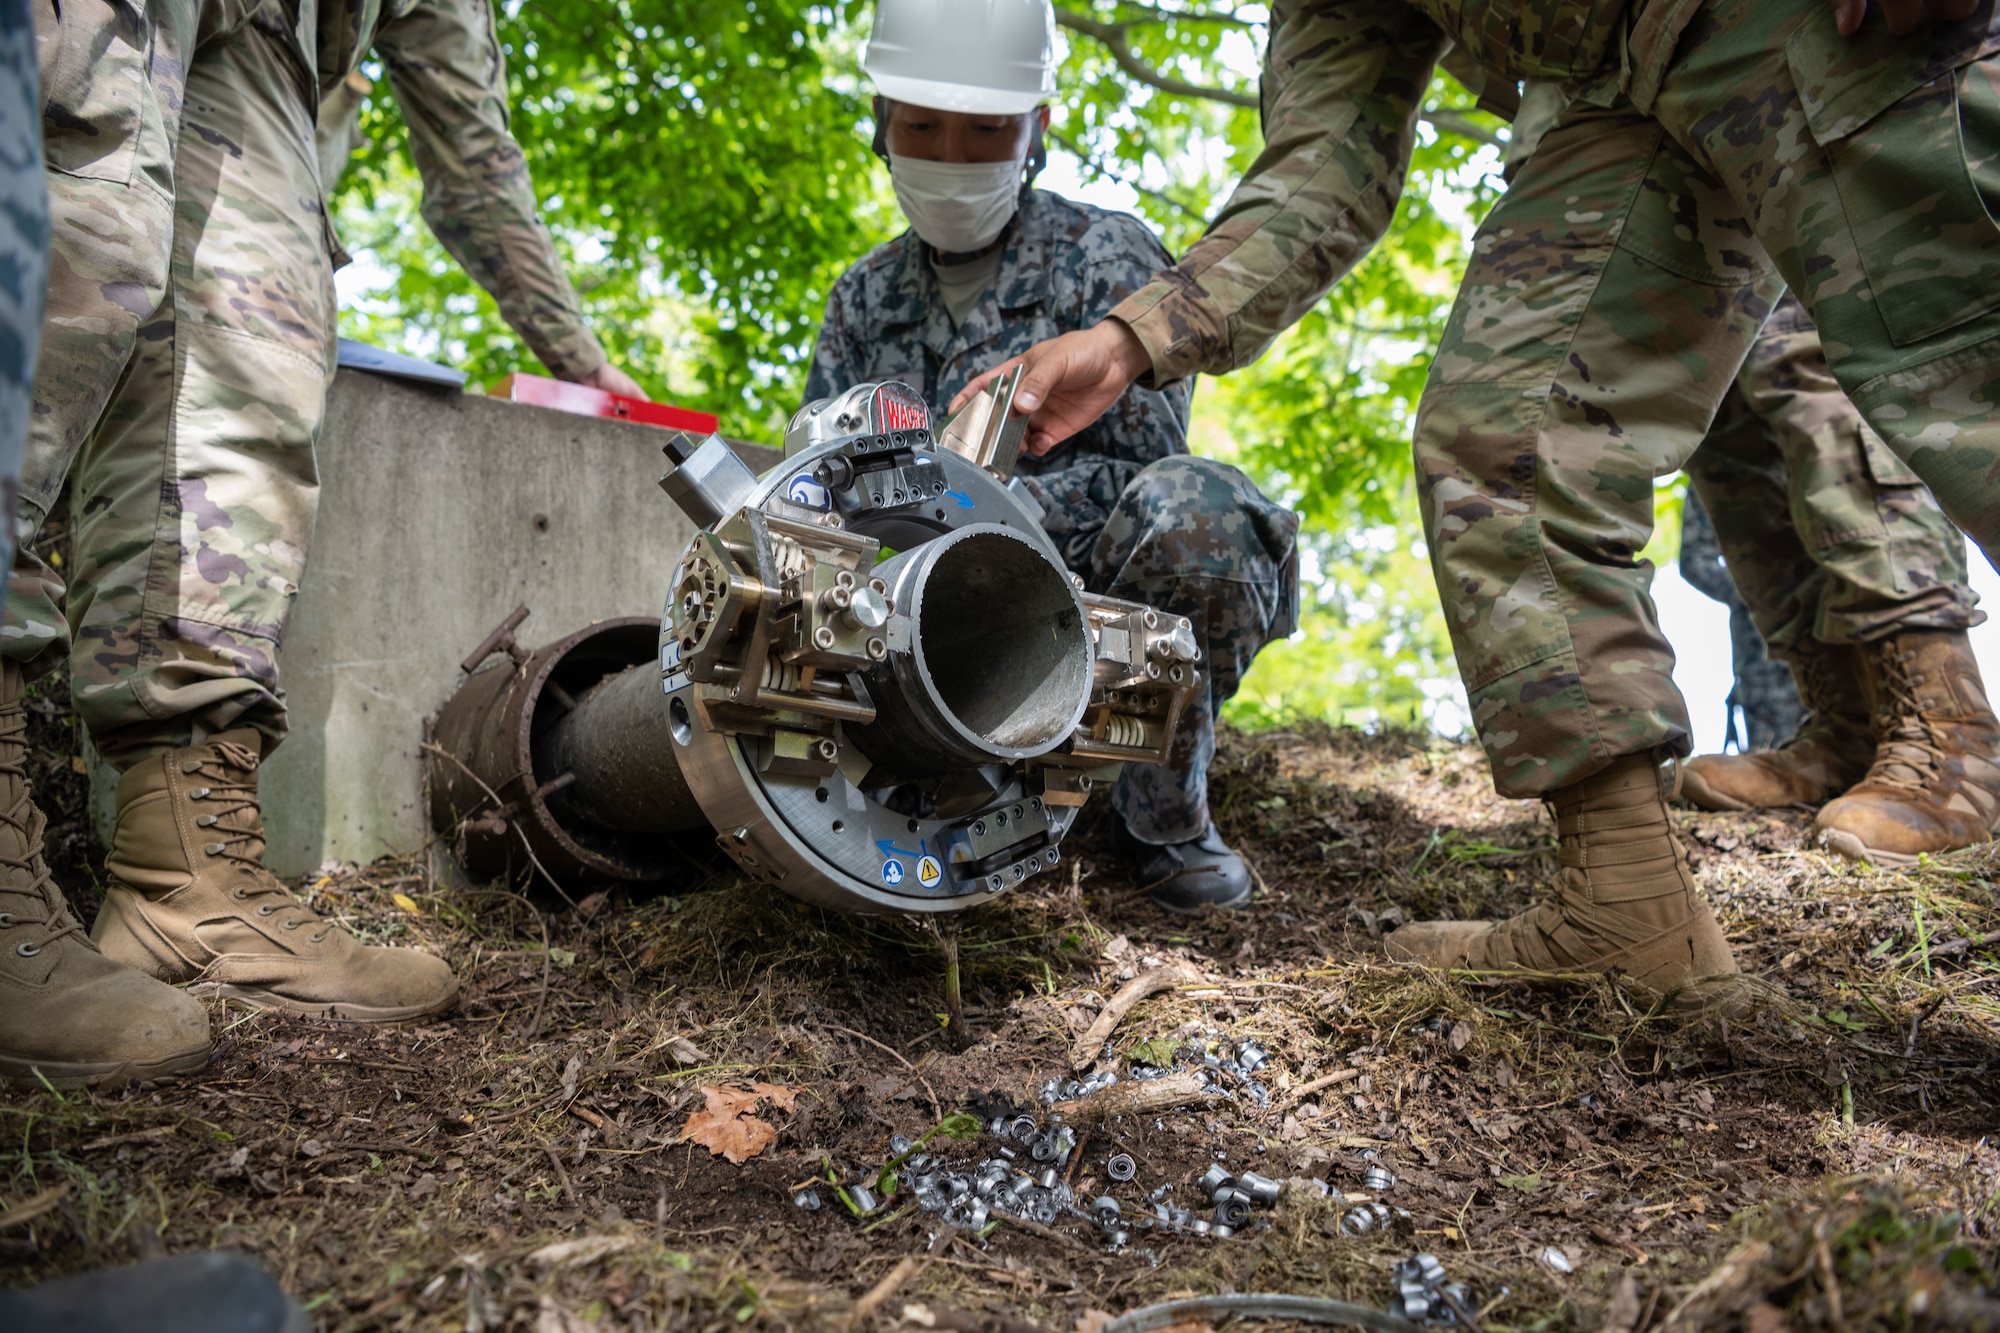 Japan Air Self-Defense Force Tech. Sgt. Akashi Kikuchi, 3rd Air Wing Civil Engineer Squadron water and fuel system maintainer, looks at new components on the Water and Fuel Expedient Repair System during the annual Prime Base Engineer Emergency Force training at Misawa Air Base, Japan, June 14, 2022.